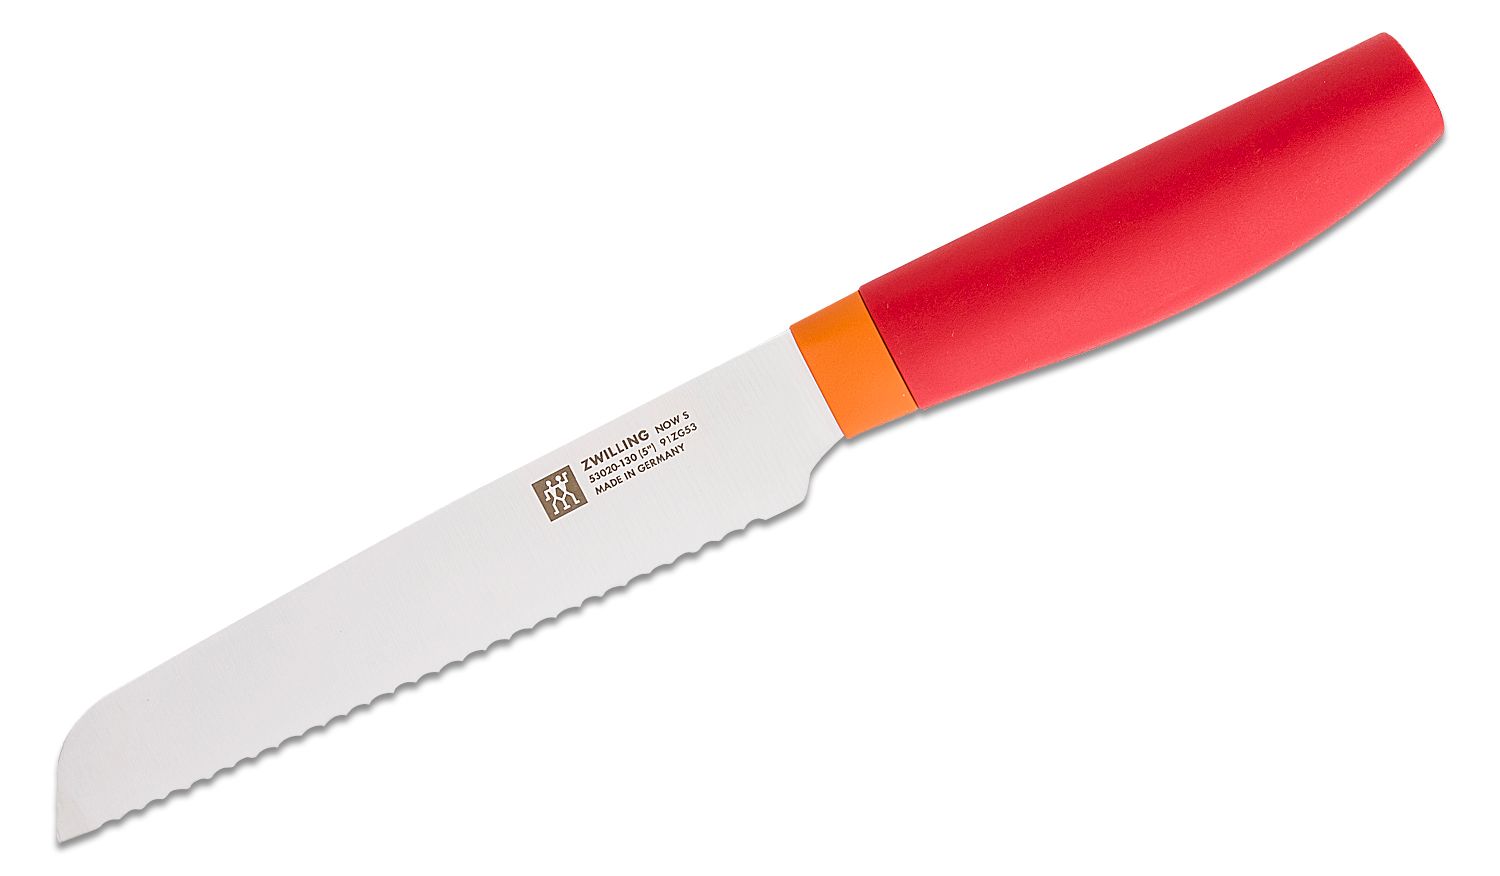 ZWILLING J.A. Henckels Gourmet 5 Serrated Utility Knife + Reviews